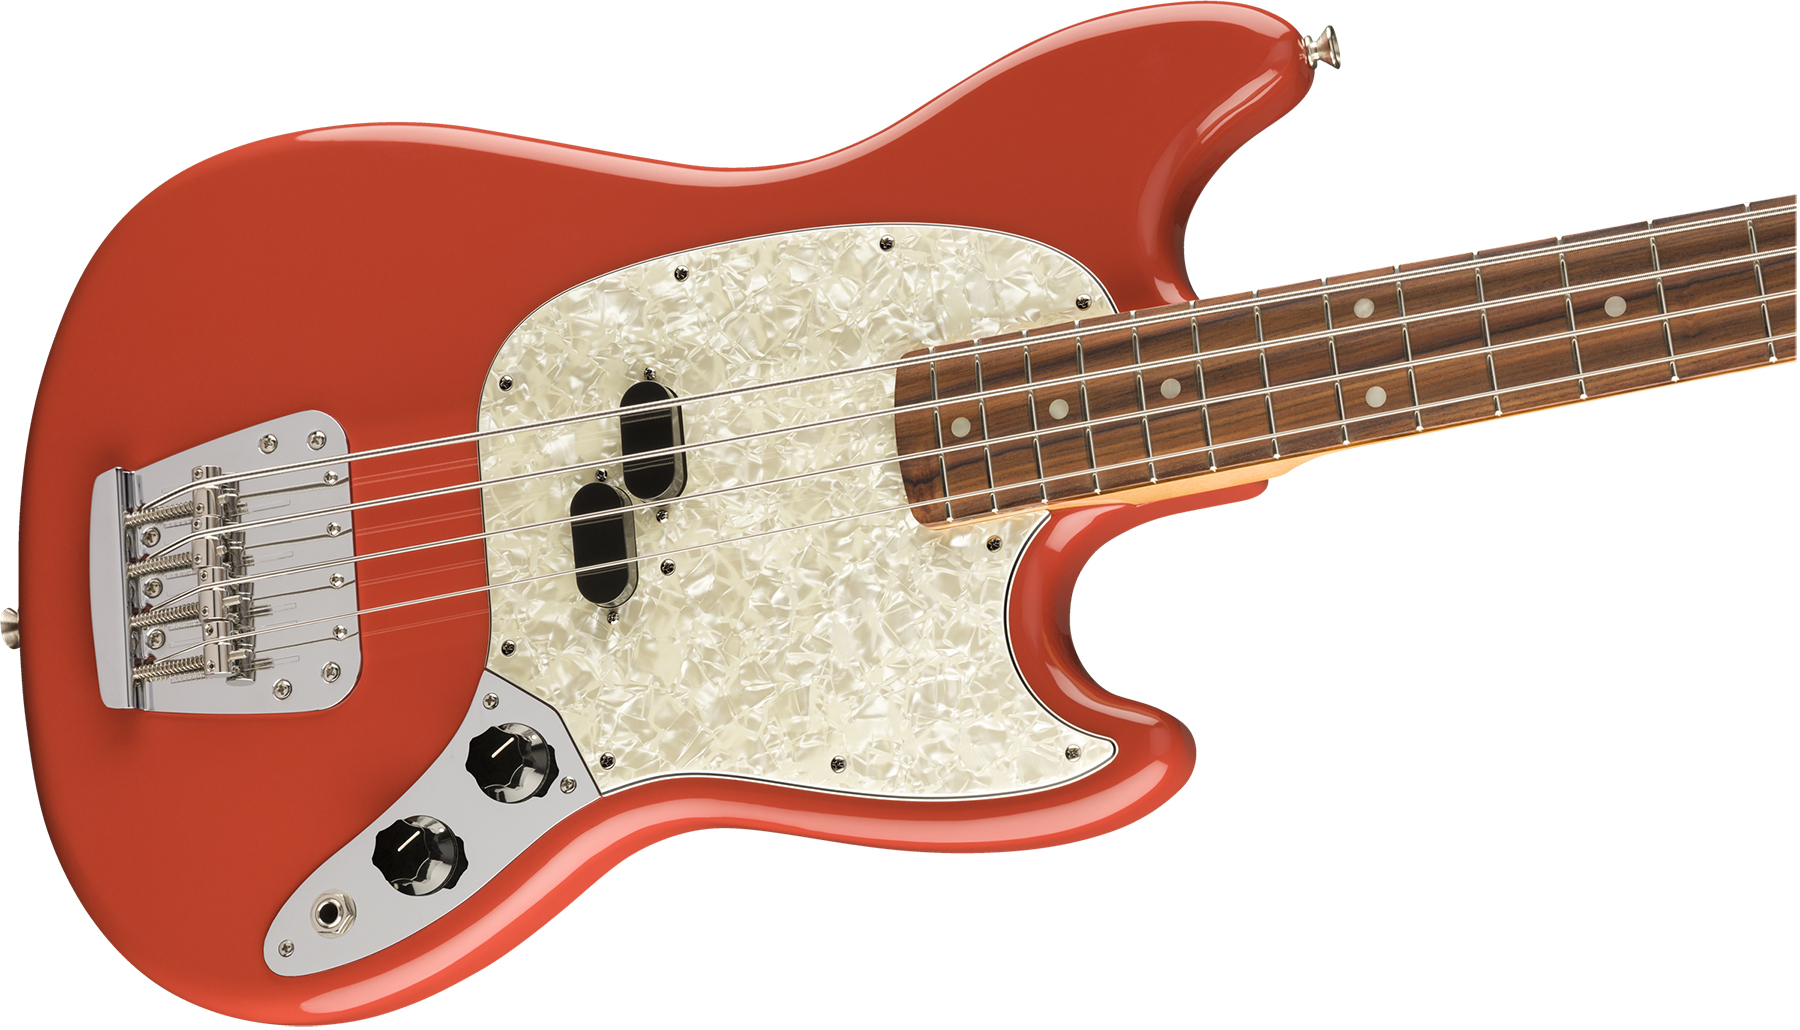 Fender Mustang Bass 60s Vintera Vintage Mex Pf - Fiesta Red - Electric bass for kids - Variation 2